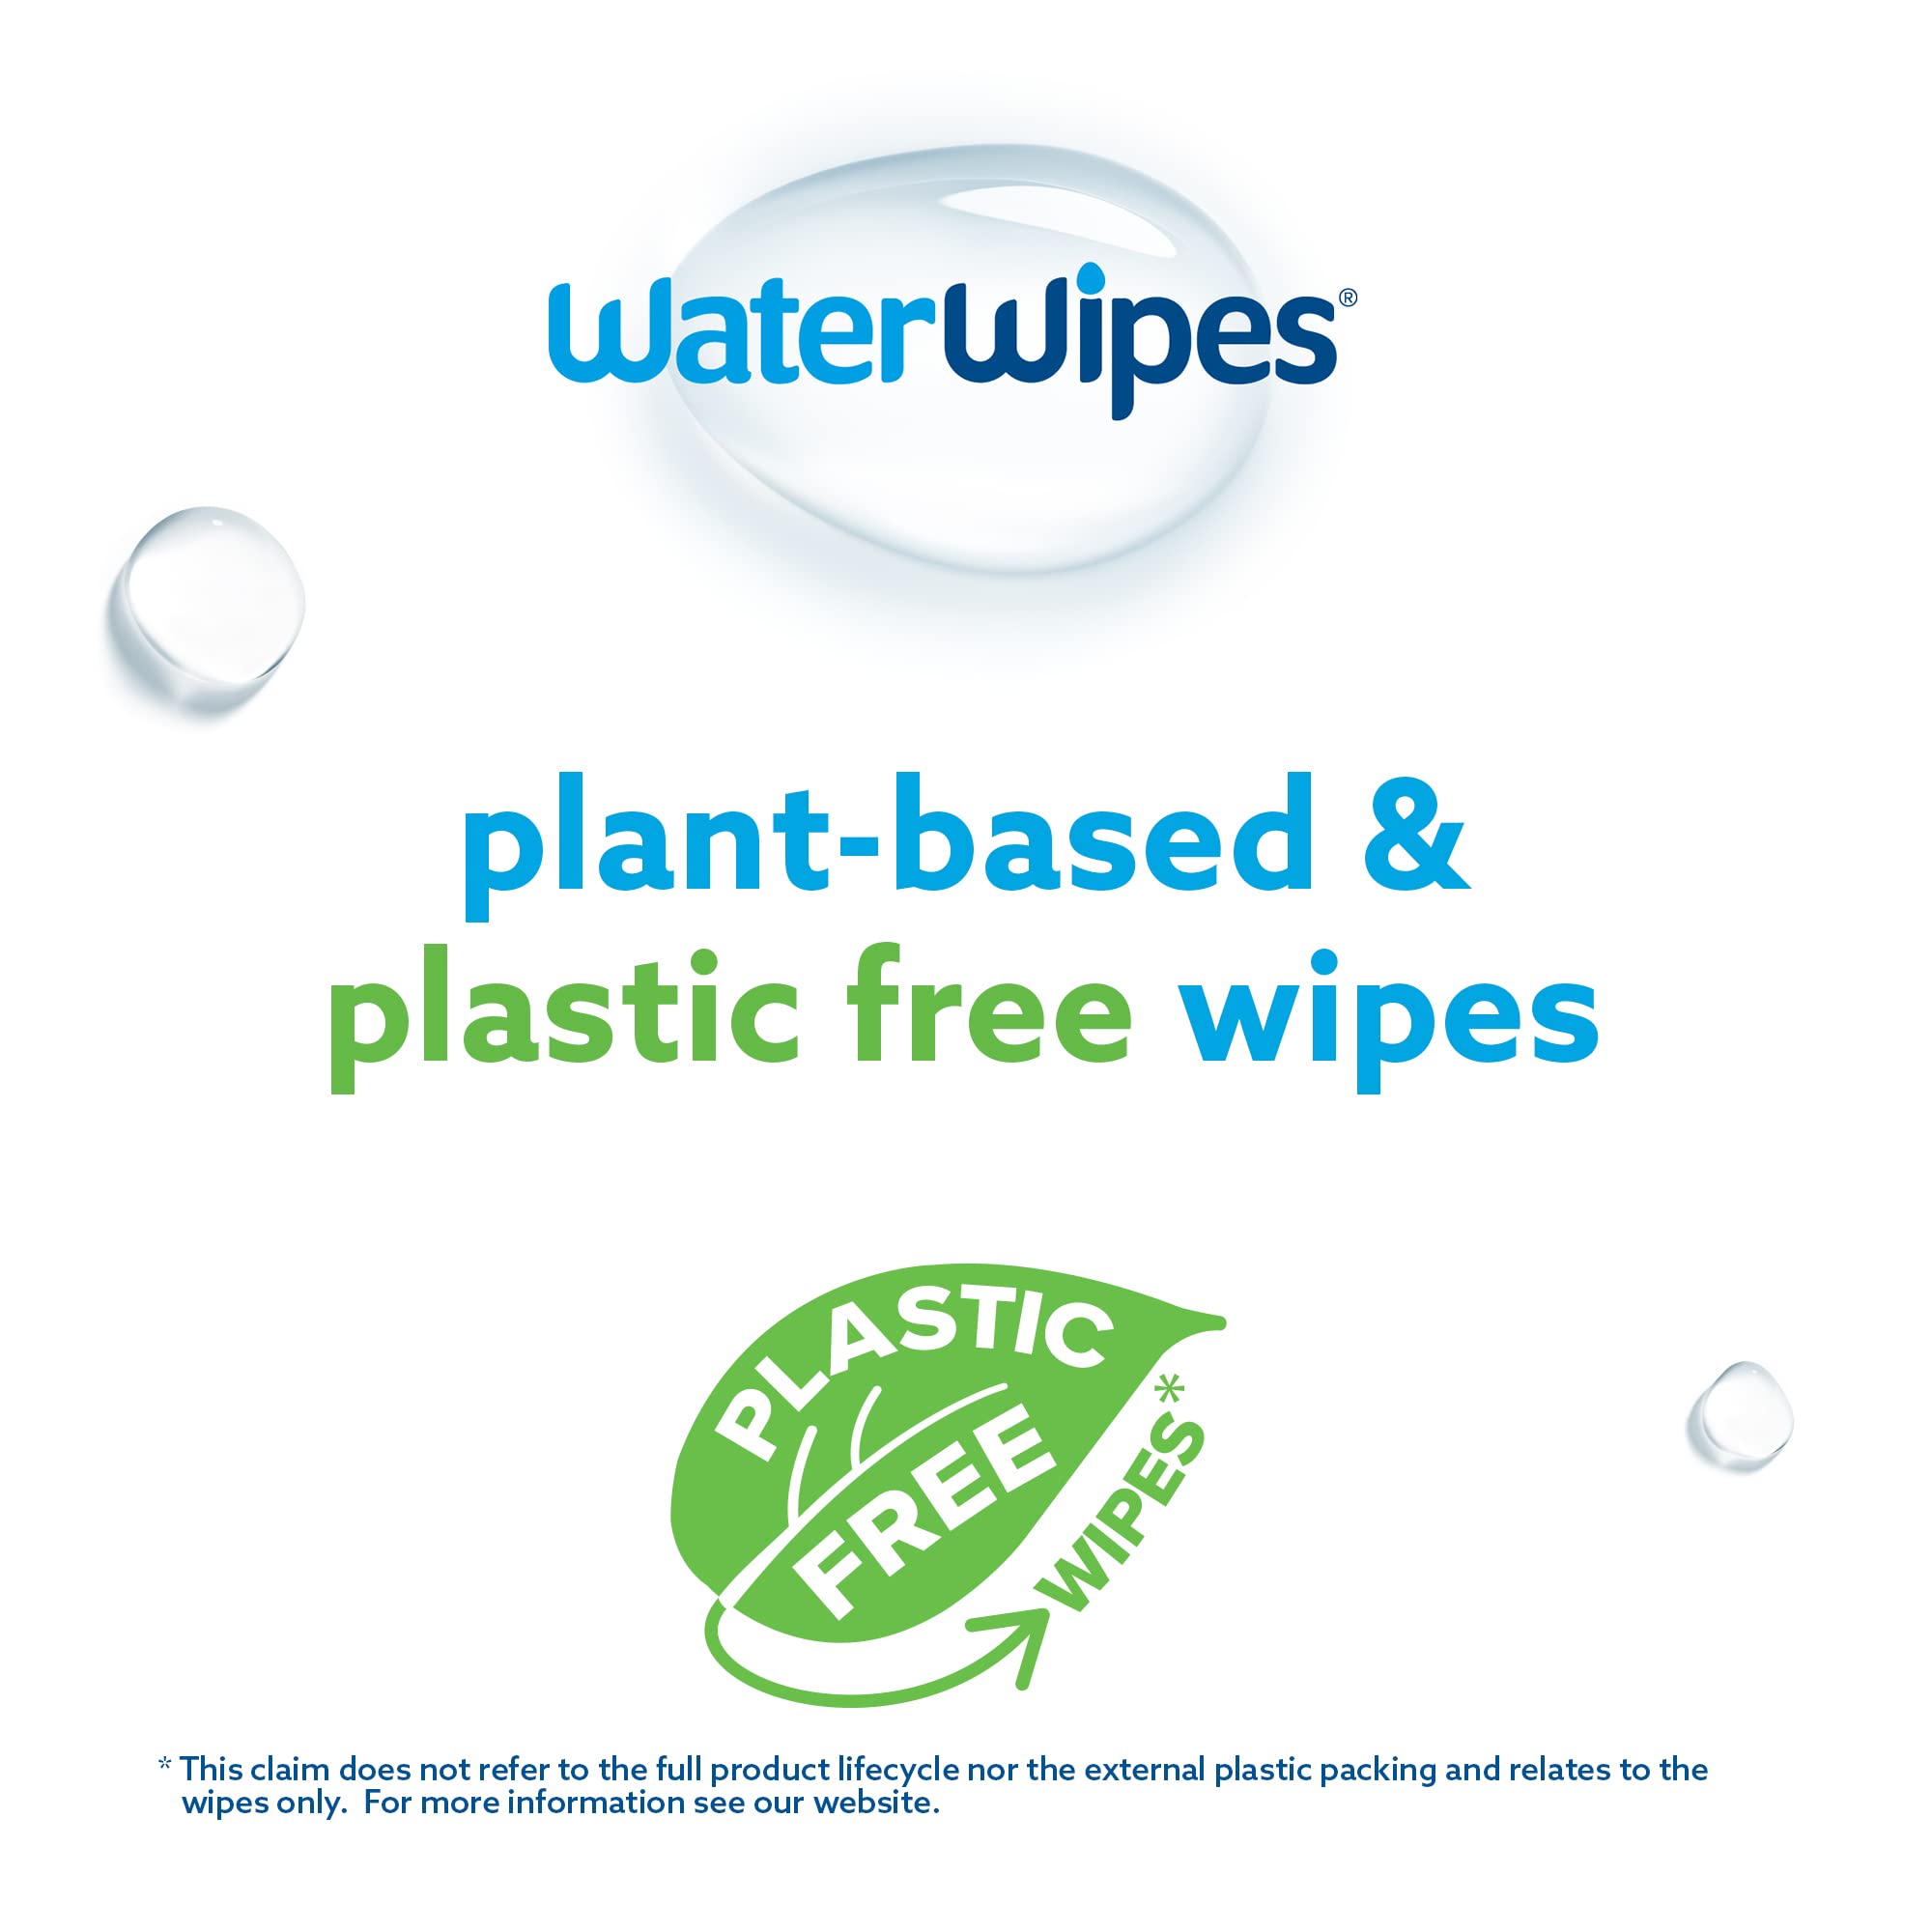 WaterWipes Plastic-Free, Rinse-Free, XL Bathing Wipes, 99.9% Water Based Wipes, Unscented & Hypoallergenic for Sensitive Skin, 192 Count (12 packs), Packaging May Vary